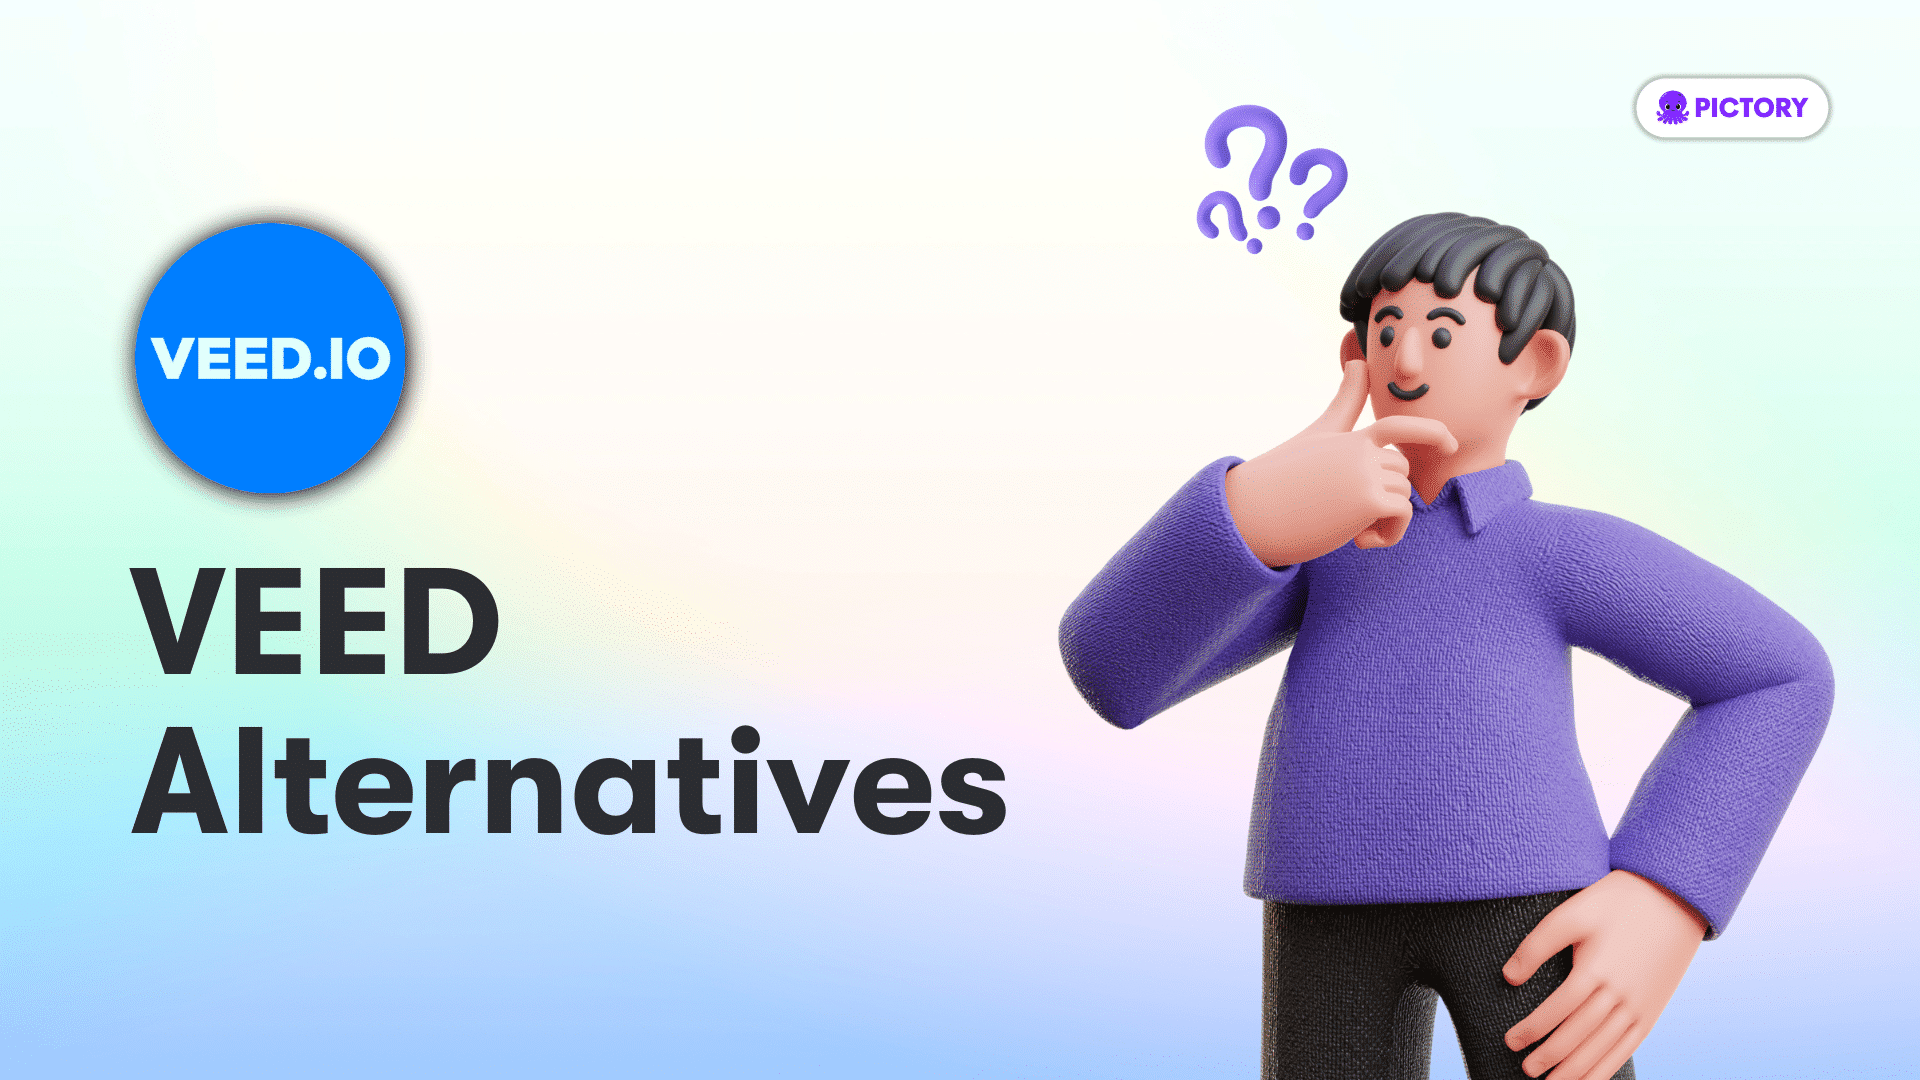 Veed logo with 'veed alternatives' text and cartoon man looking quizzical